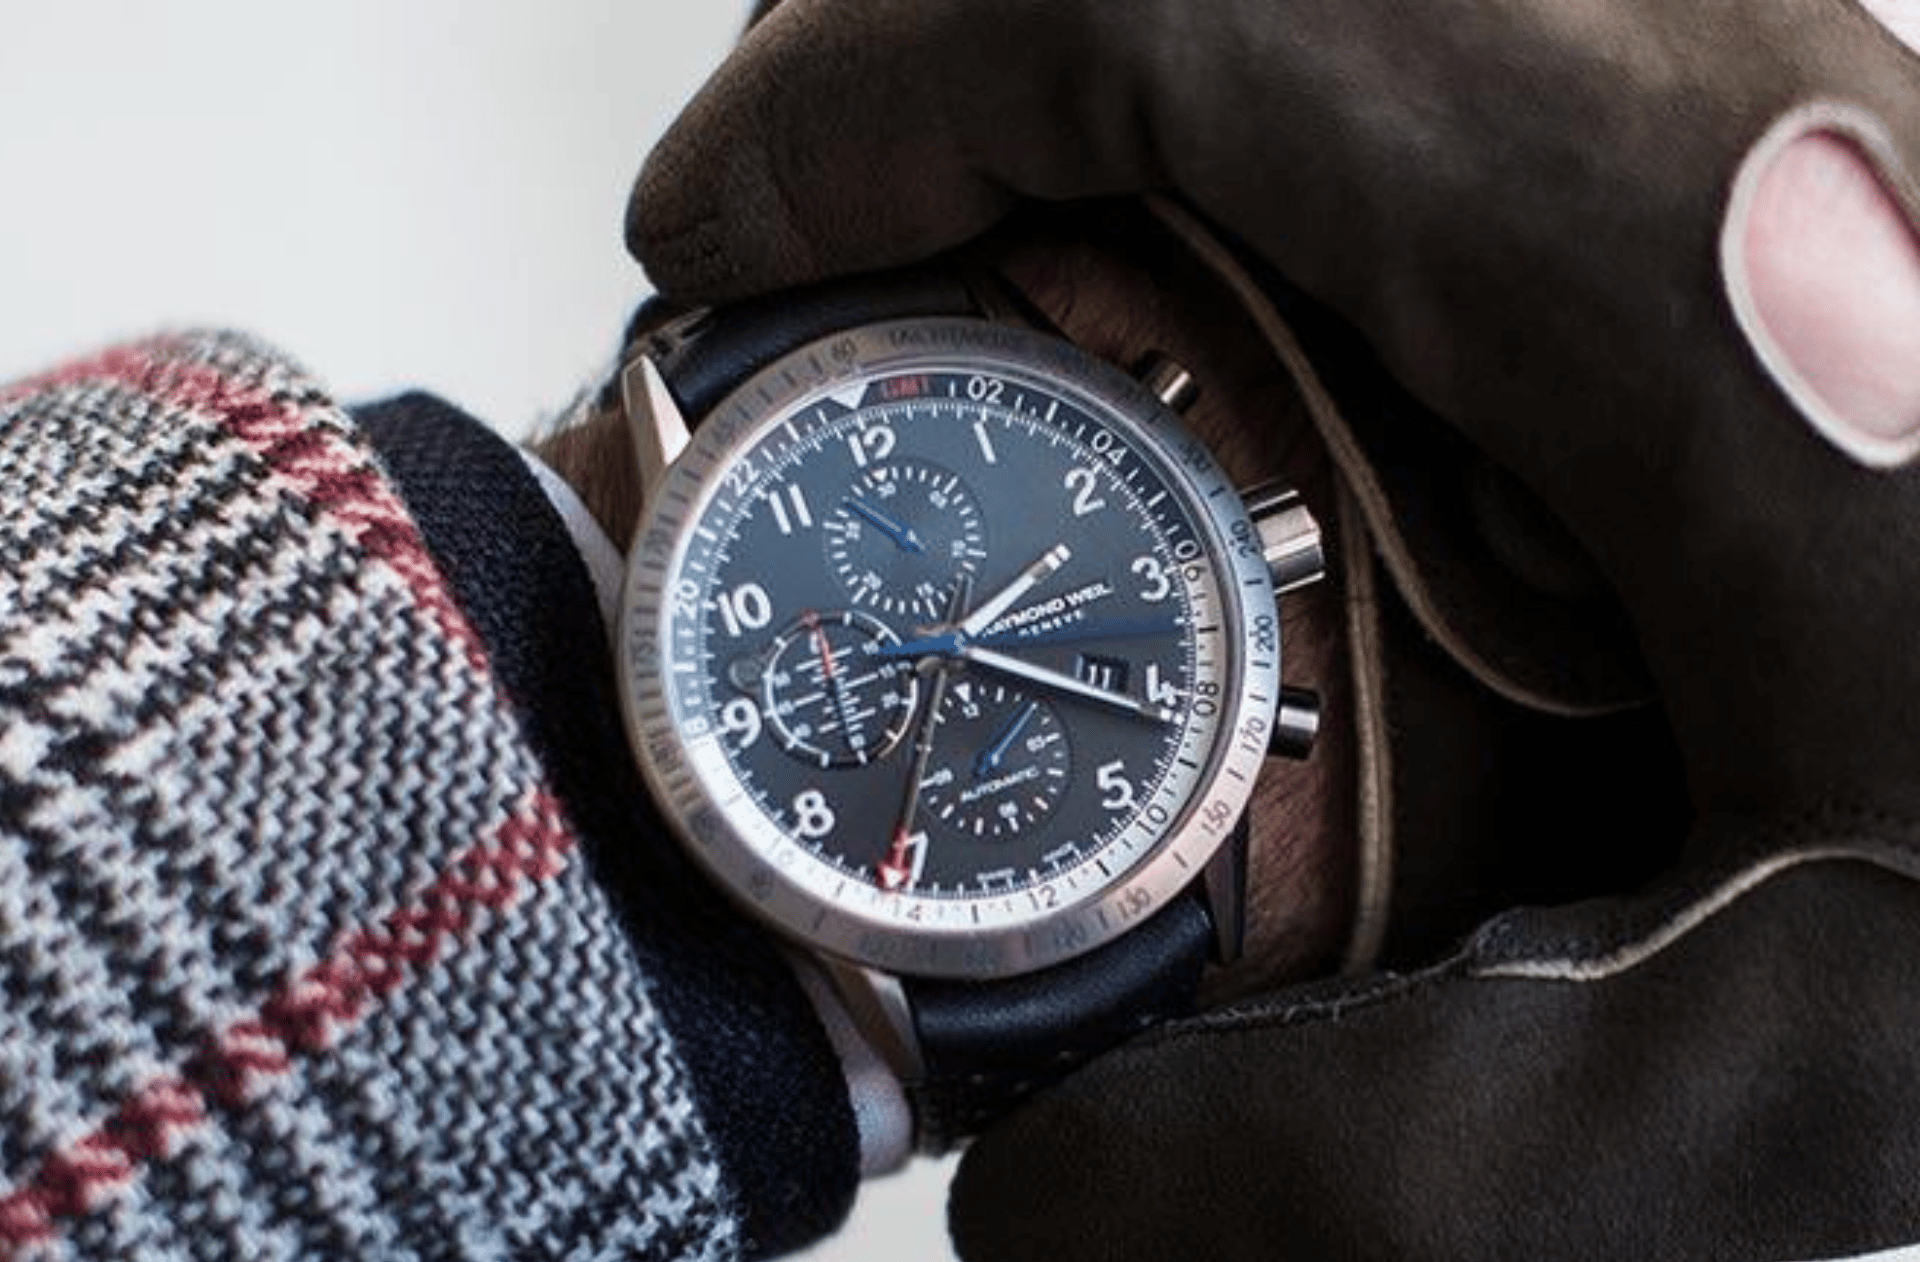 Guide to Chronograph Watches (What is Chronograph Watch?)